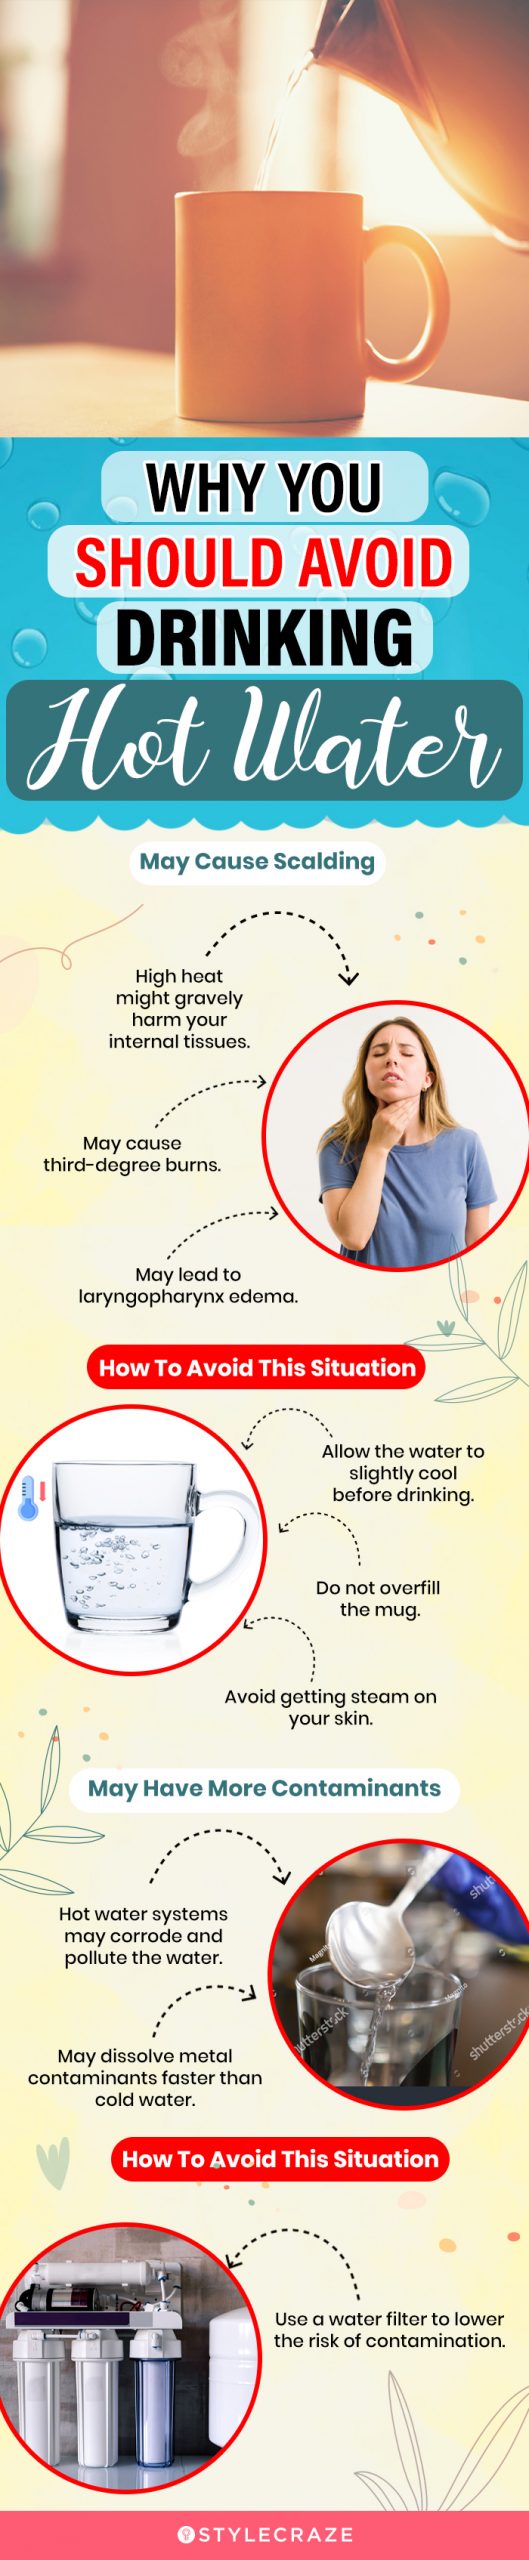 why you should avoid drinking hot water (infographic)